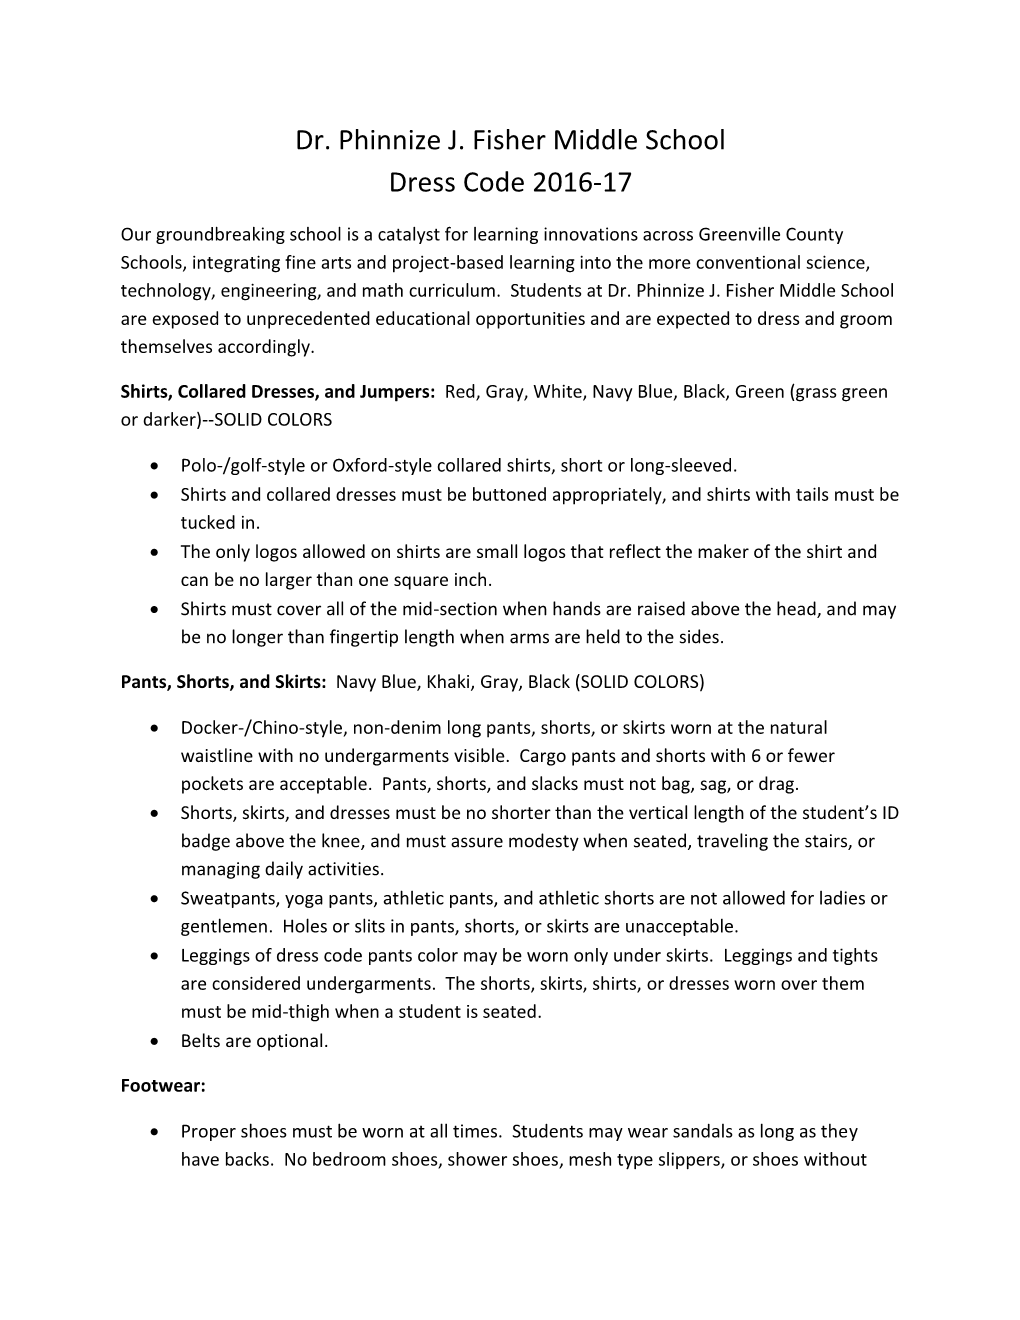 Dr. Phinnize J. Fisher Middle School Dress Code 2016-17